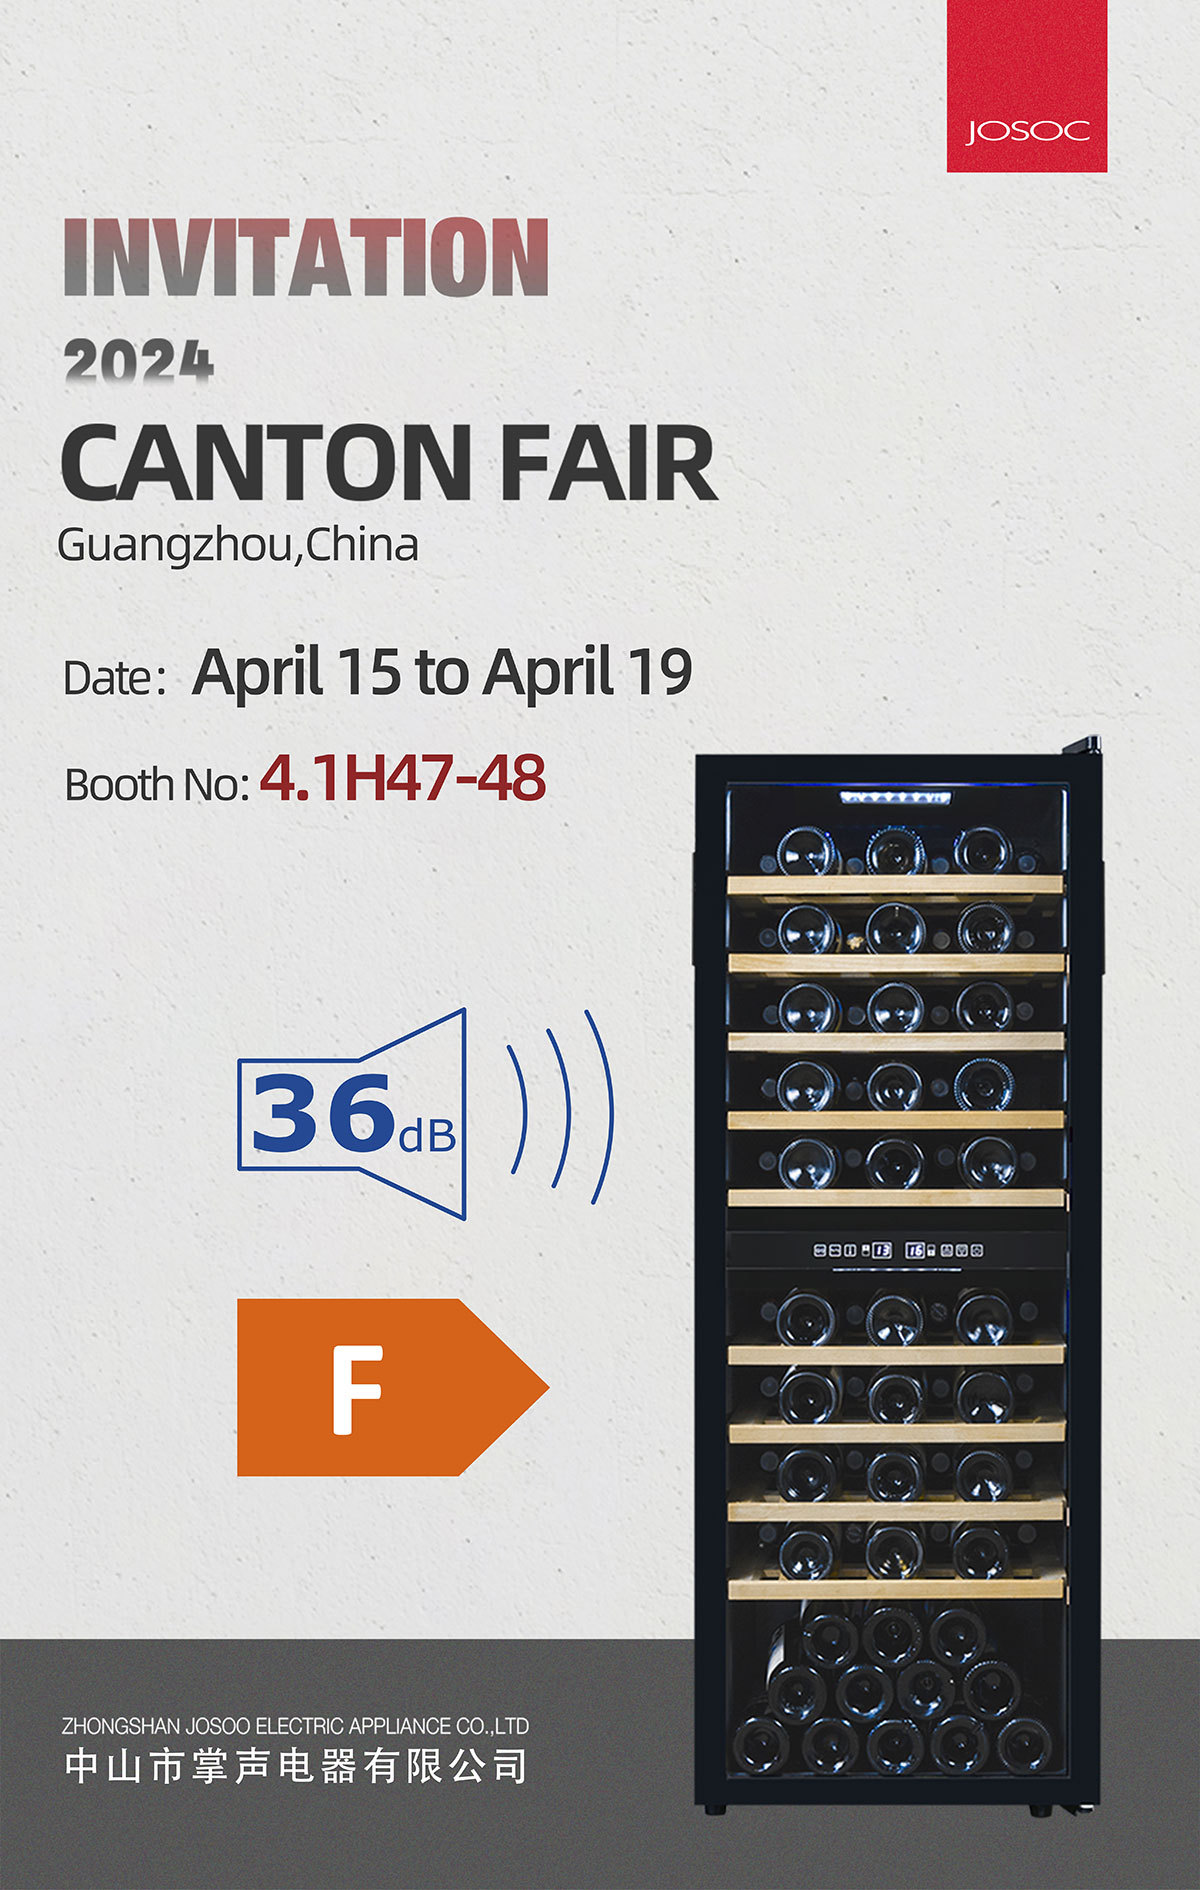 Wine Cooler Manufacturer Invites You to the Canton Fair